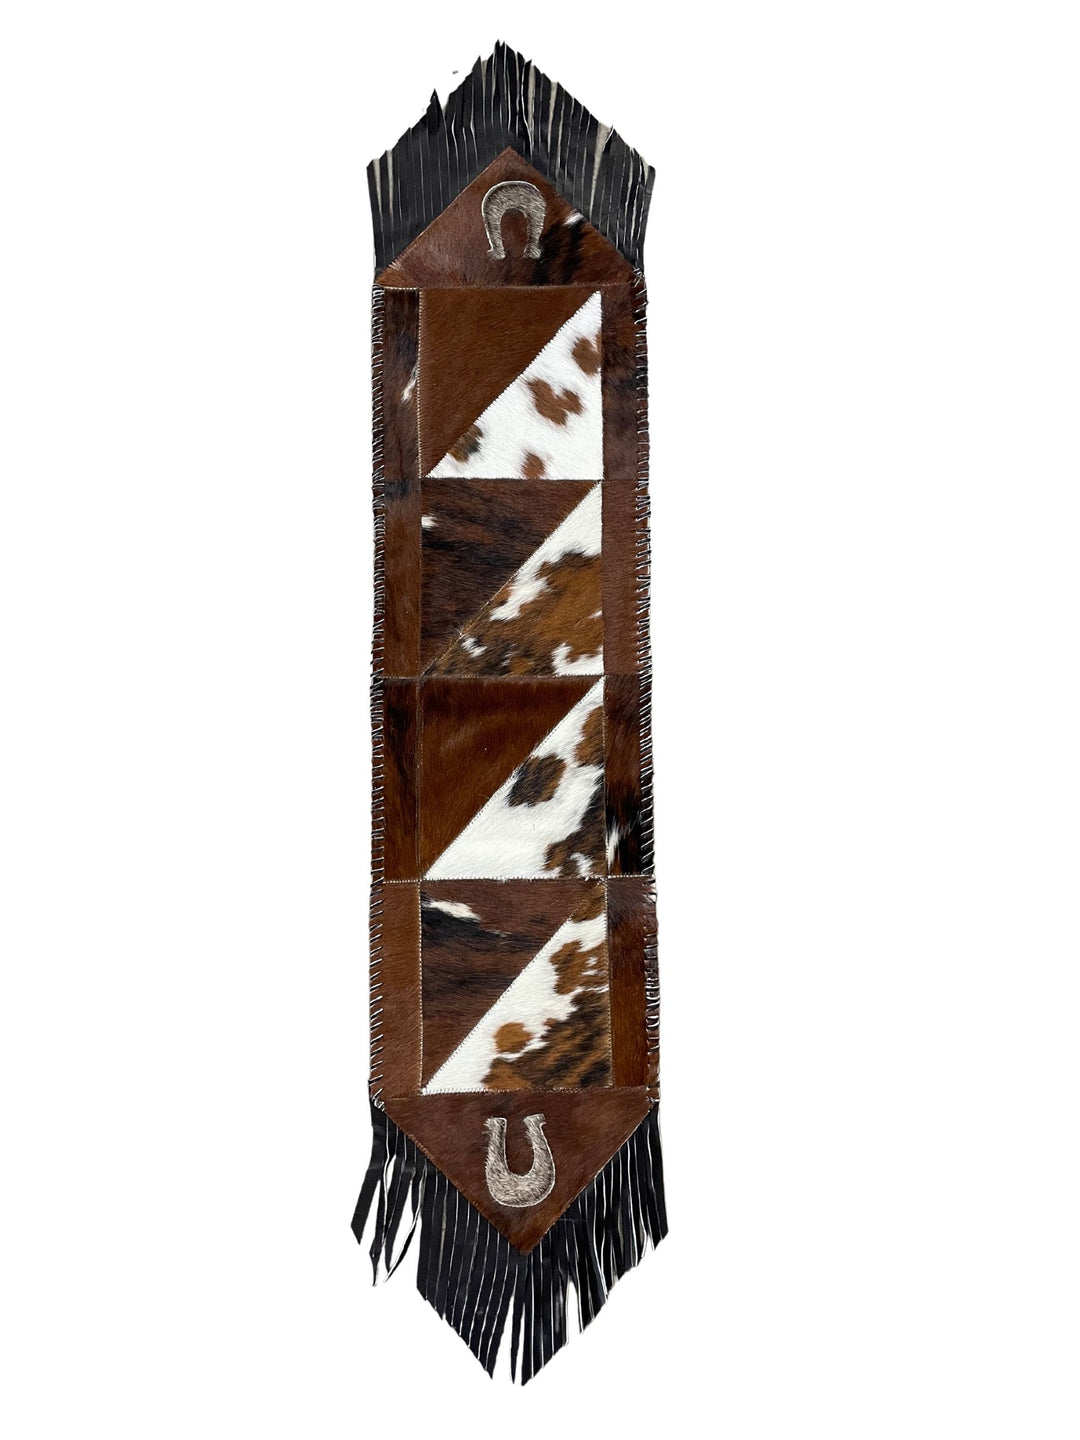 Cowhide Table Runners with Leather Fringe - Tricolor Horseshoe